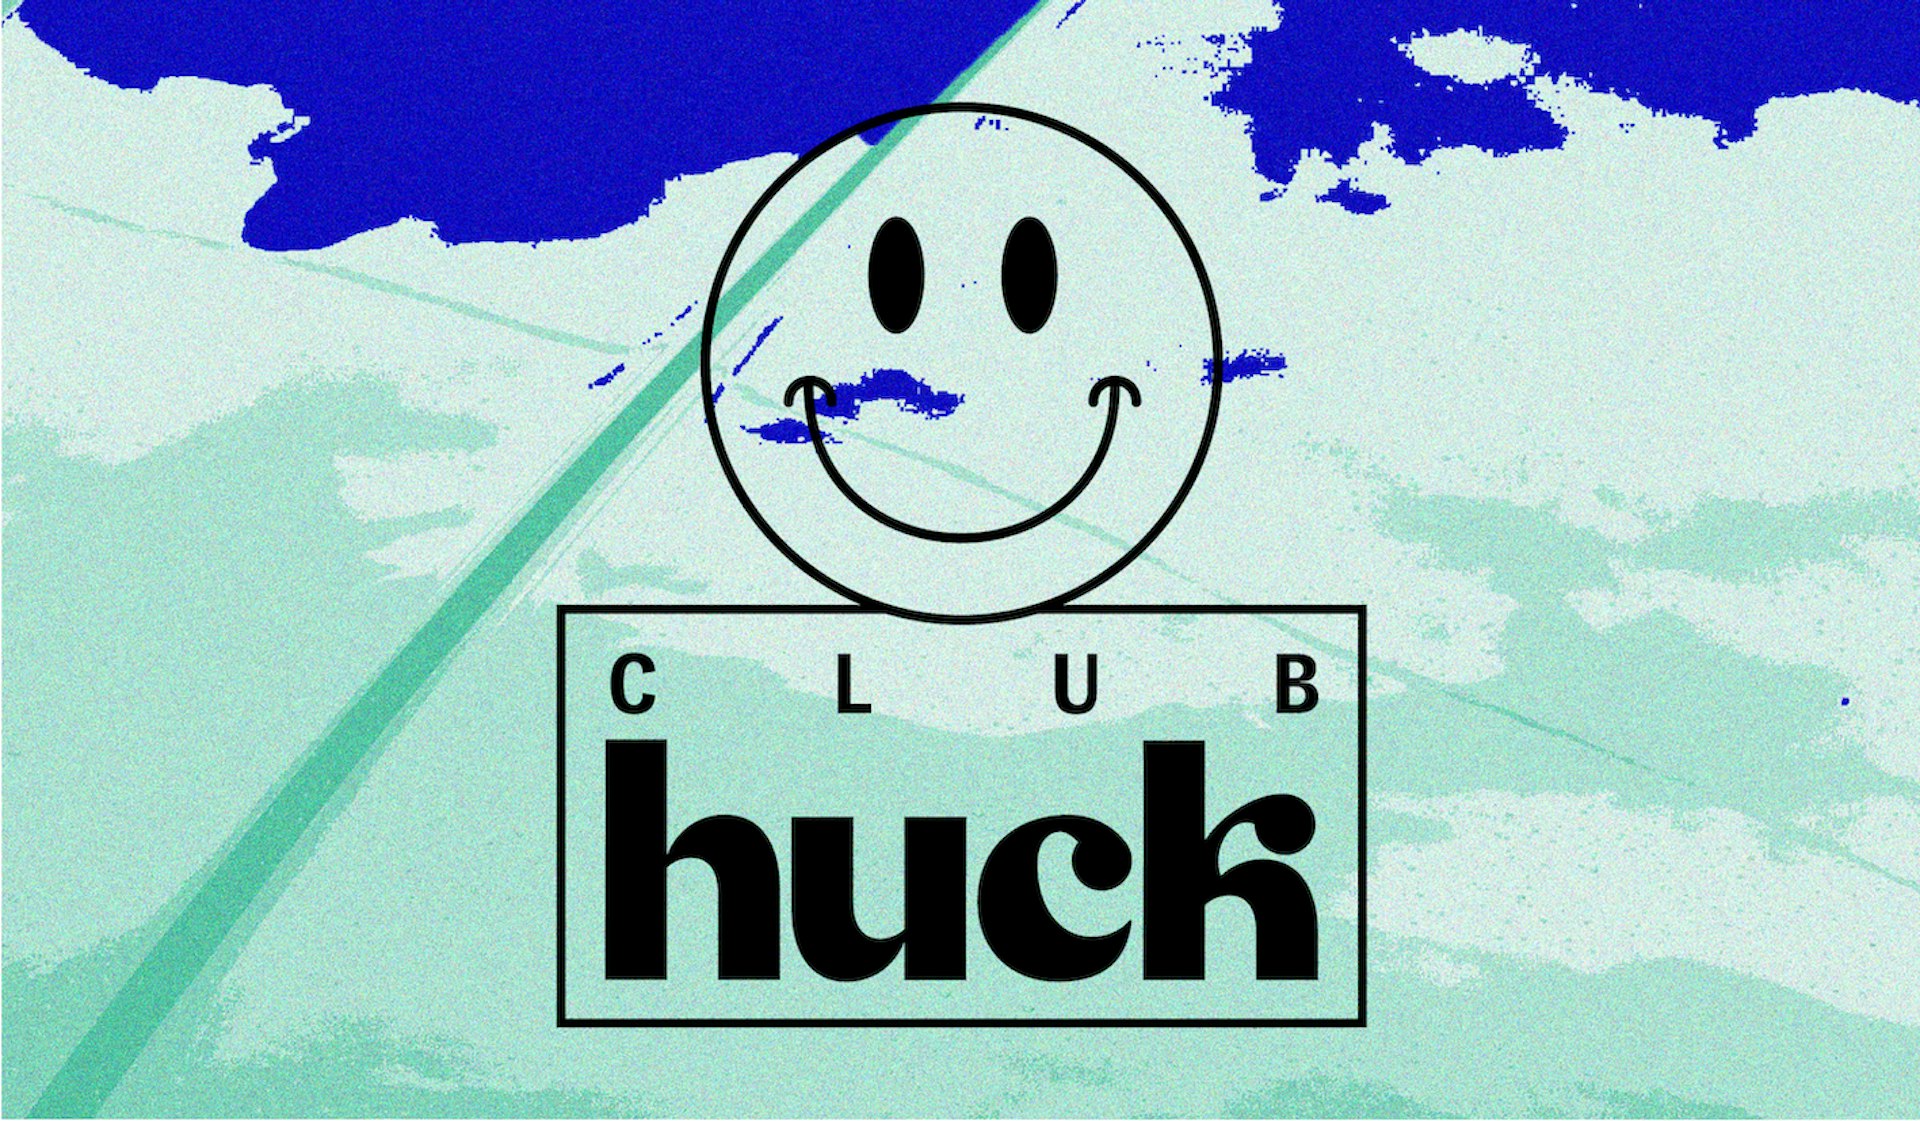 Welcome to Club Huck